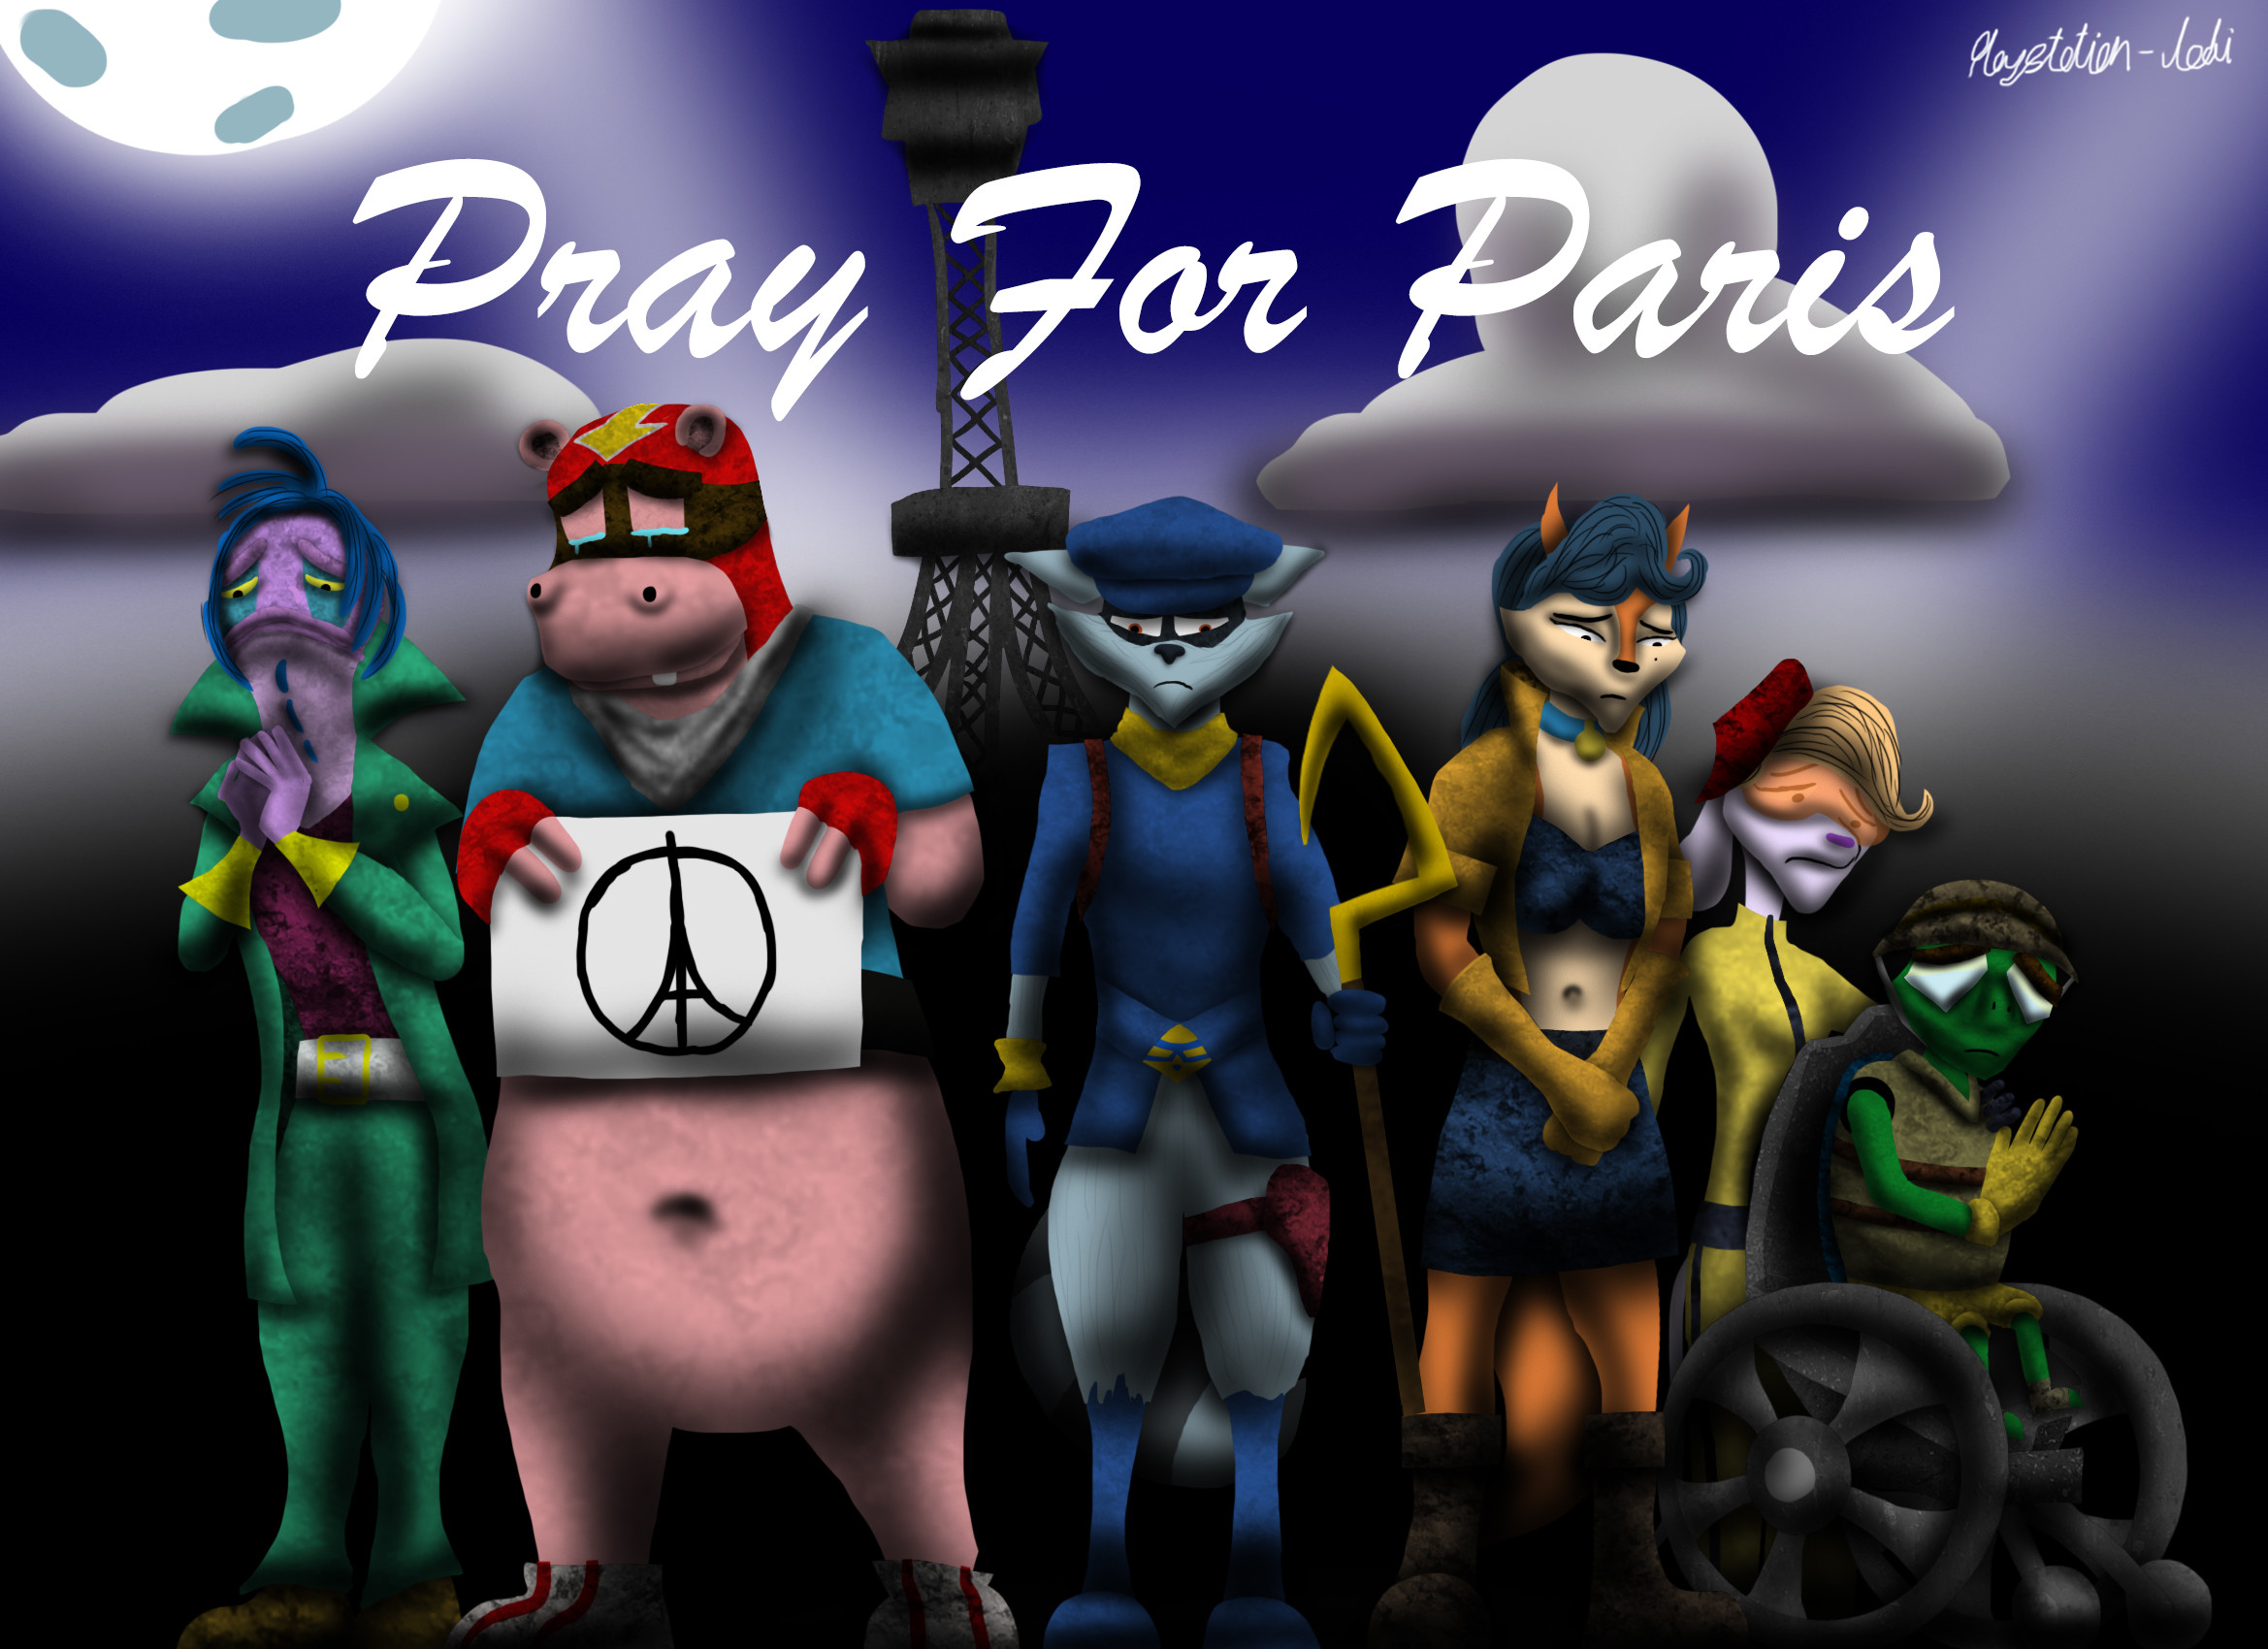 2338x1700 ... The Cooper Gang Prays for Paris by Playstation-Jedi